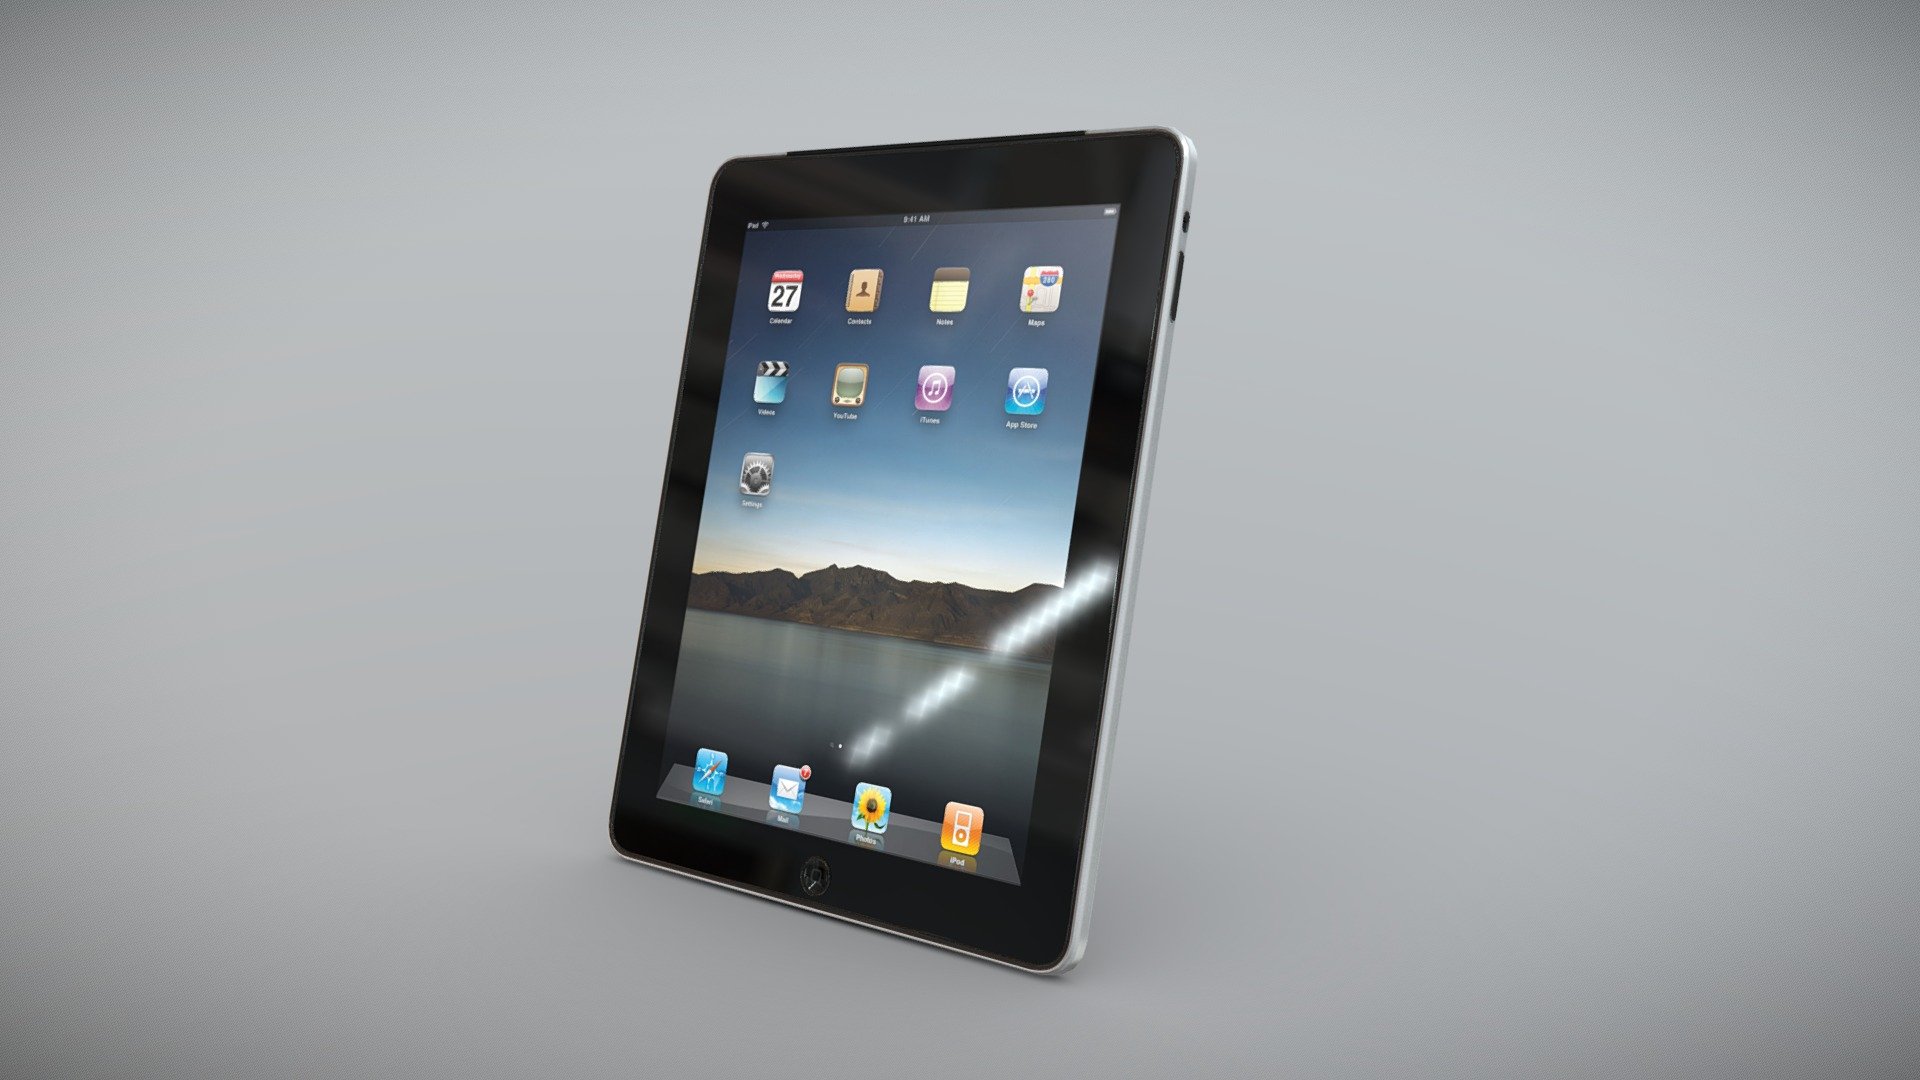 •   Let me present to you high-quality low-poly 3D model Apple iPad. Modeling was made with ortho-photos of real tablet that is why all details of design are recreated most authentically.

•    This model consists of one mesh, it is low-polygonal and it has only one material.

•   The total of the main textures is 5. Resolution of all textures is 2048 pixels square aspect ratio in .png format. Also there is original texture file .PSD format in separate archive.

•   Polygon count of the model is – 1259.

•   The model has correct dimensions in real-world scale. All parts grouped and named correctly.

•   To use the model in other 3D programs there are scenes saved in formats .fbx, .obj, .DAE, .max (2010 version).

Note: If you see some artifacts on the textures, it means compression works in the Viewer. We recommend setting HD quality for textures. But anyway, original textures have no artifacts 3d model